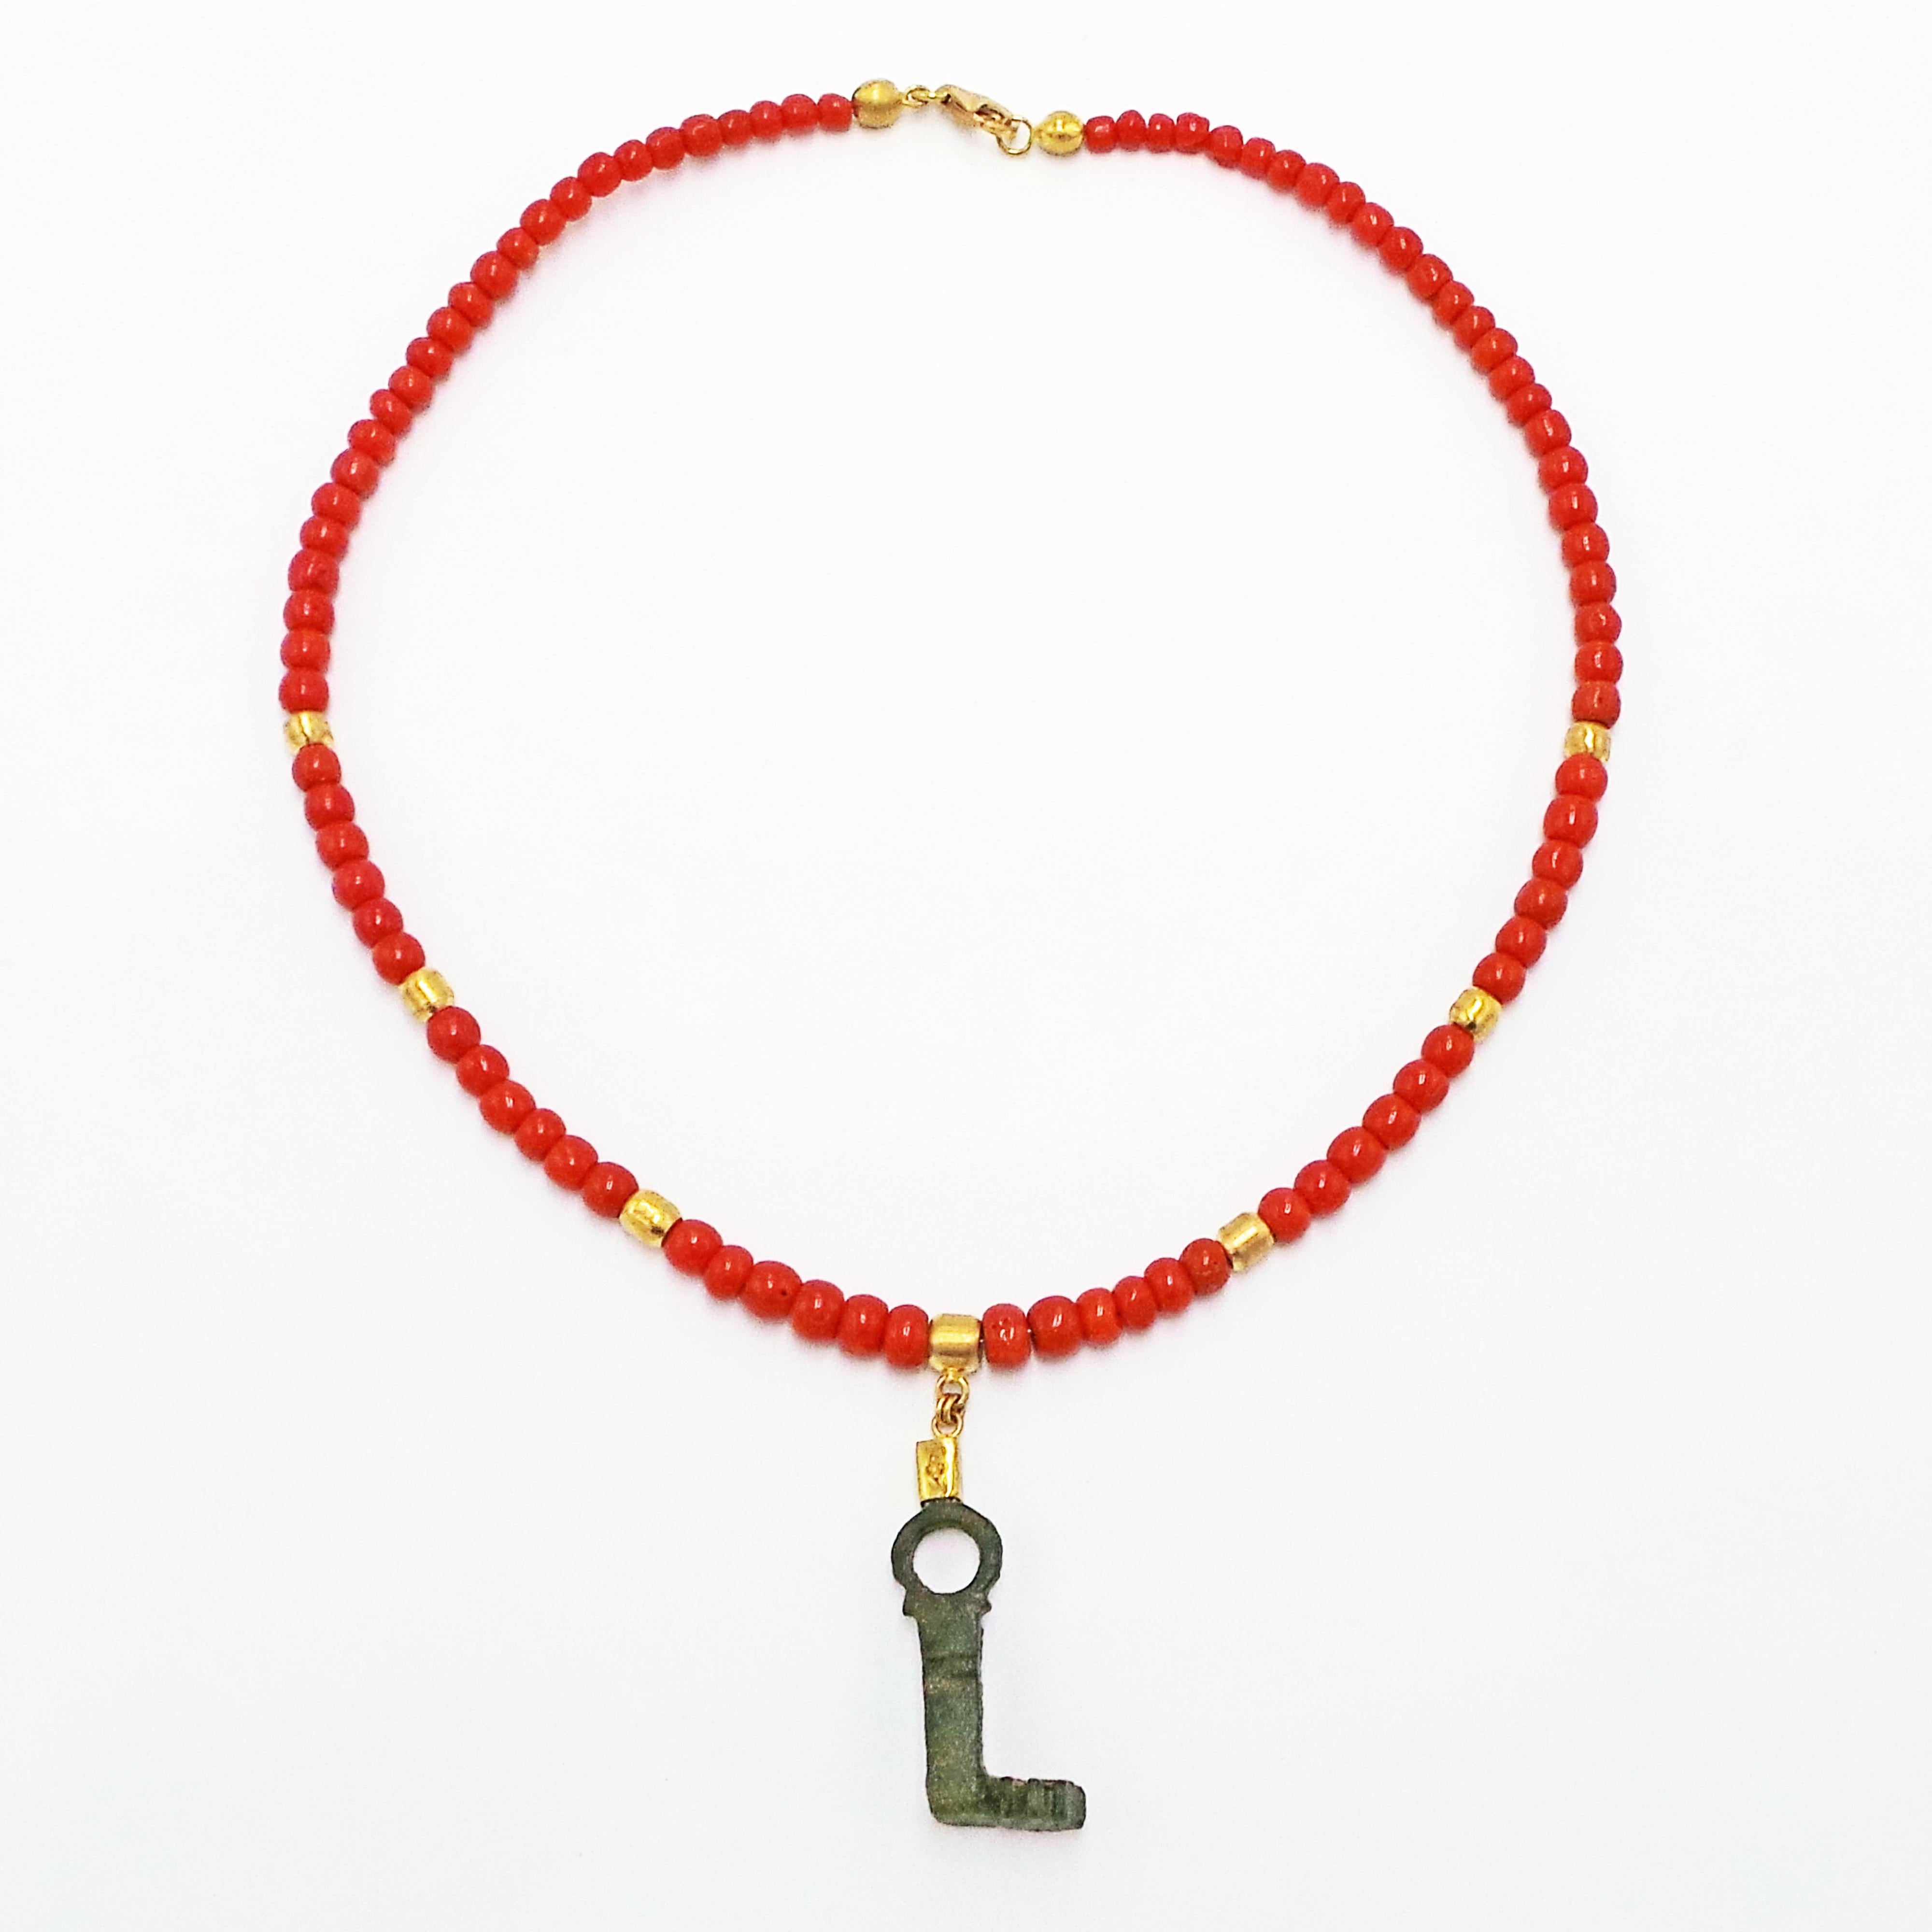 Ancient Roman bronze key (3rd-4th century AD) and 22k yellow gold pendant on a coral and 18k yellow gold beaded necklace.  Necklace is 17 inches in length and finished with an 18k gold lobster clasp. One-of-a-kind pendant necklace has a rich color